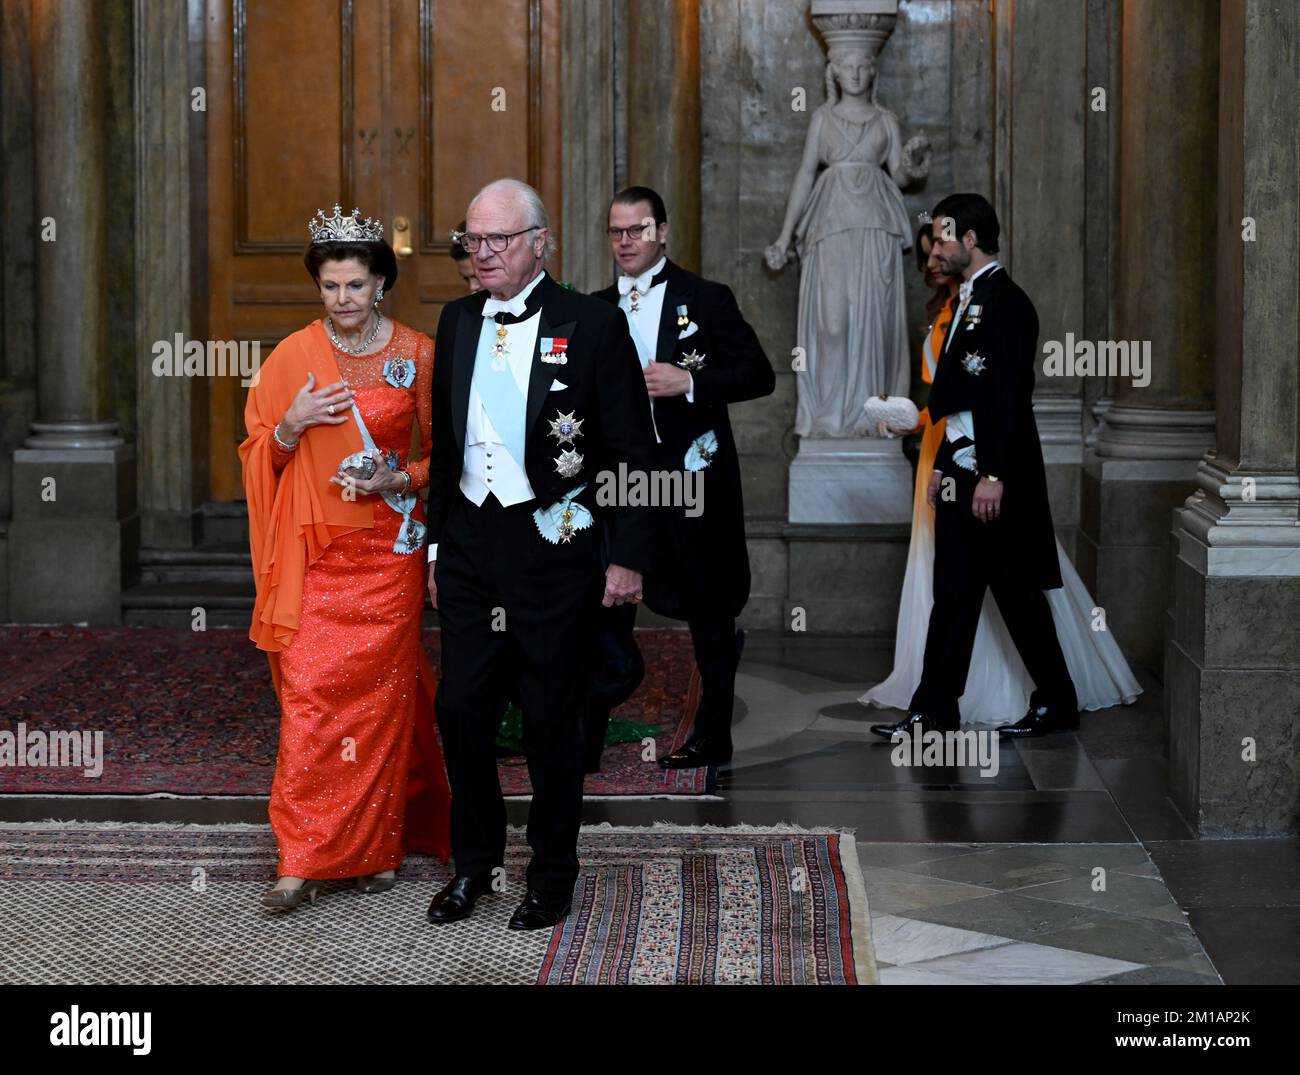 Queen Silvia and King Carl Gustaf attend the King's dinner for the Nobel laureates at the Royal Palace in Stockholm, Sweden, 11 December 2022. Photo: Pontus Lundahl / TT / 10050 Stock Photo